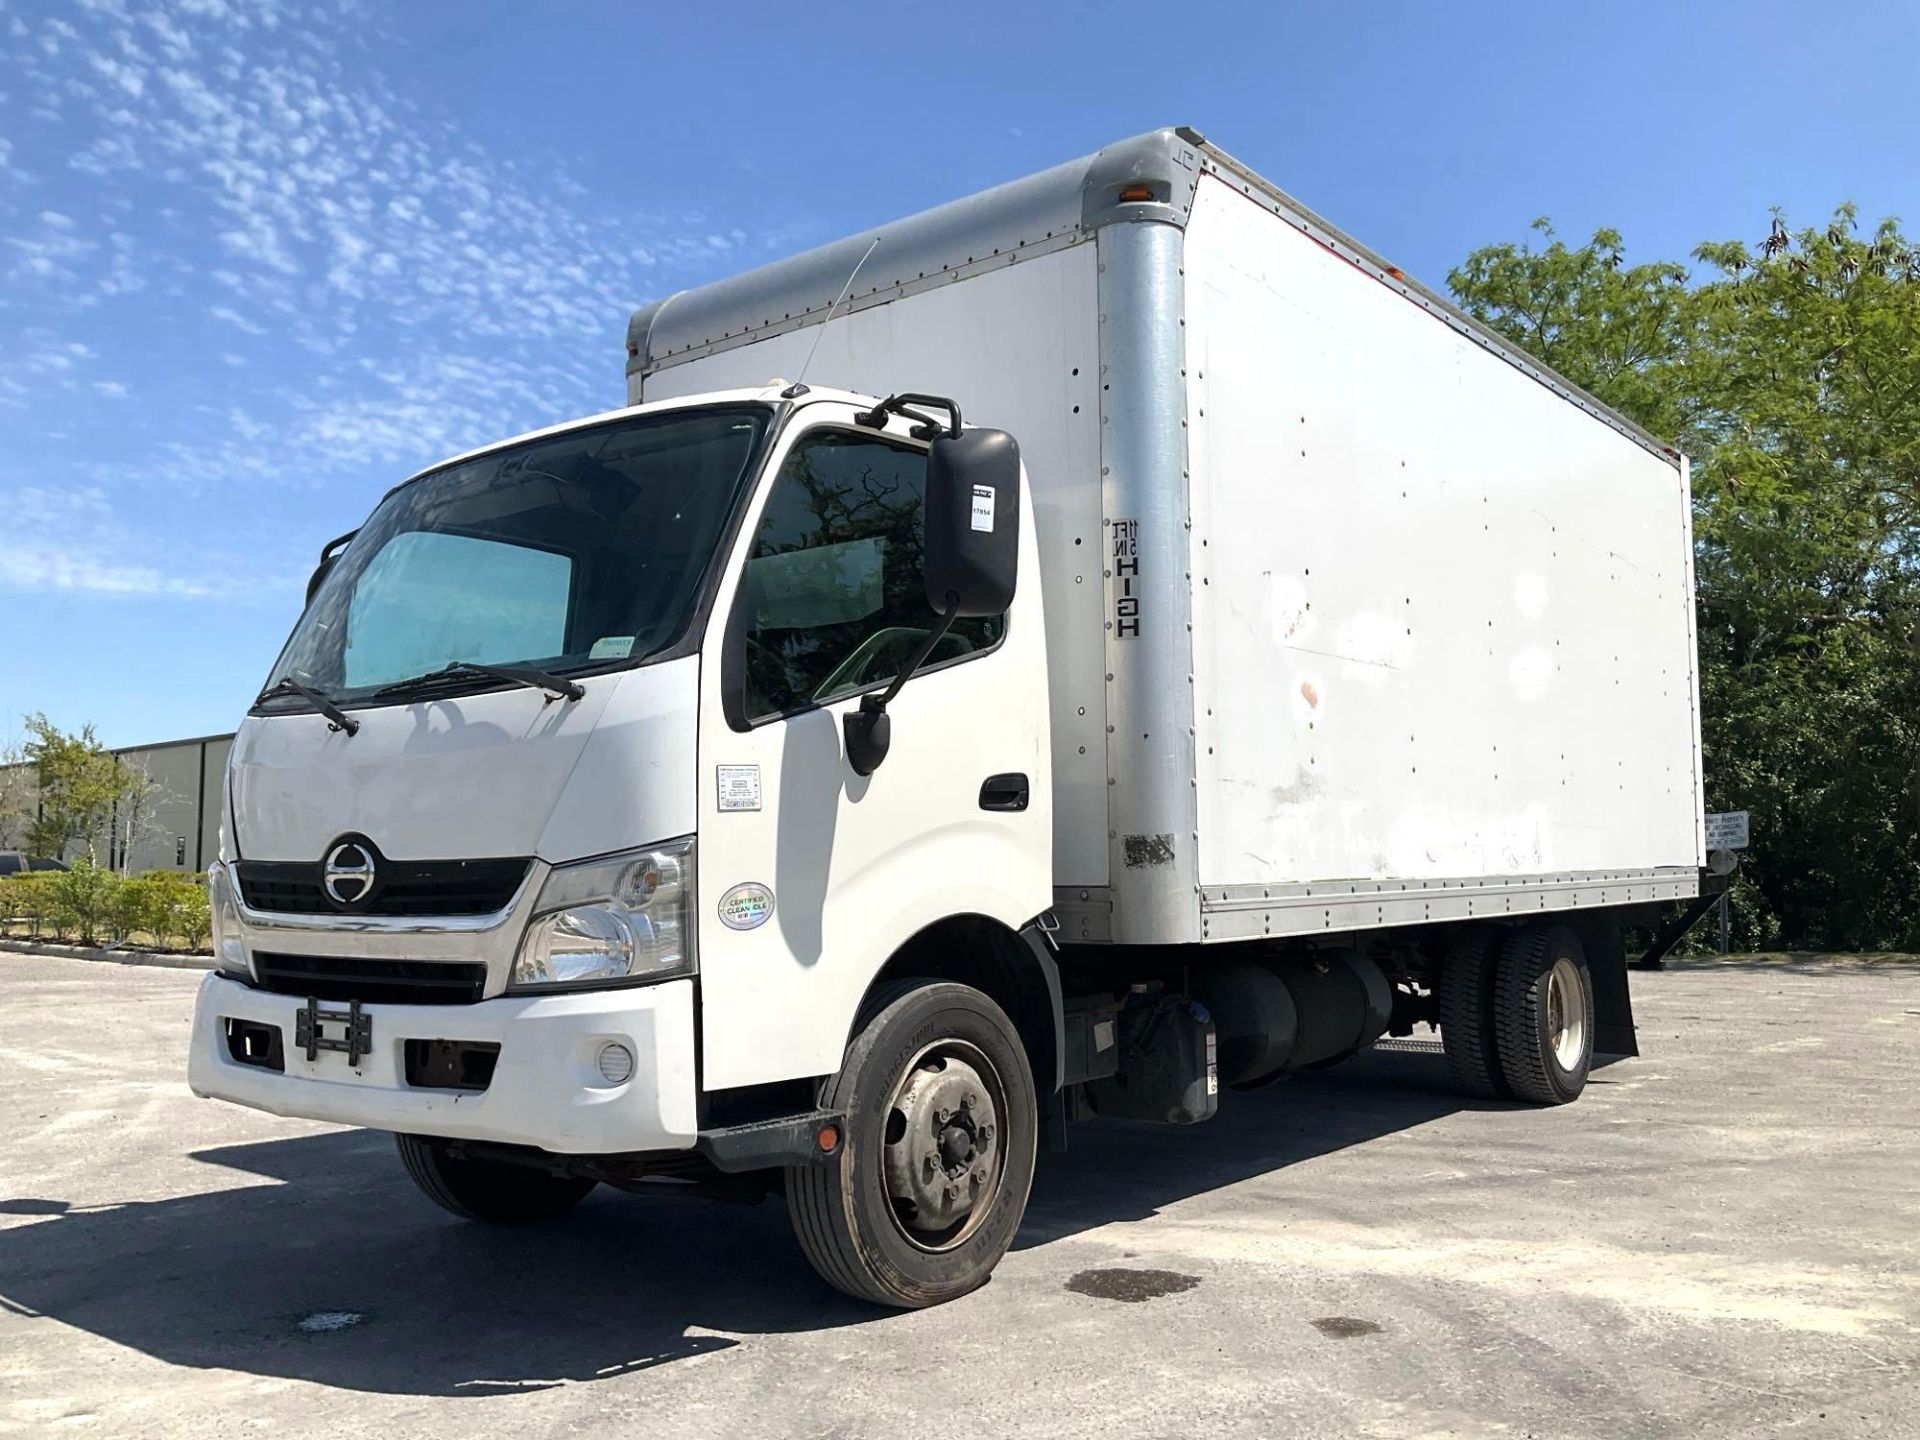 2017 HINO 740 BOX TRUCK , DIESEL , APPROX GVWR 17,950 LBS, BOX BODY APPROX 18FT, ETRACKS, BACK UP... - Image 2 of 29